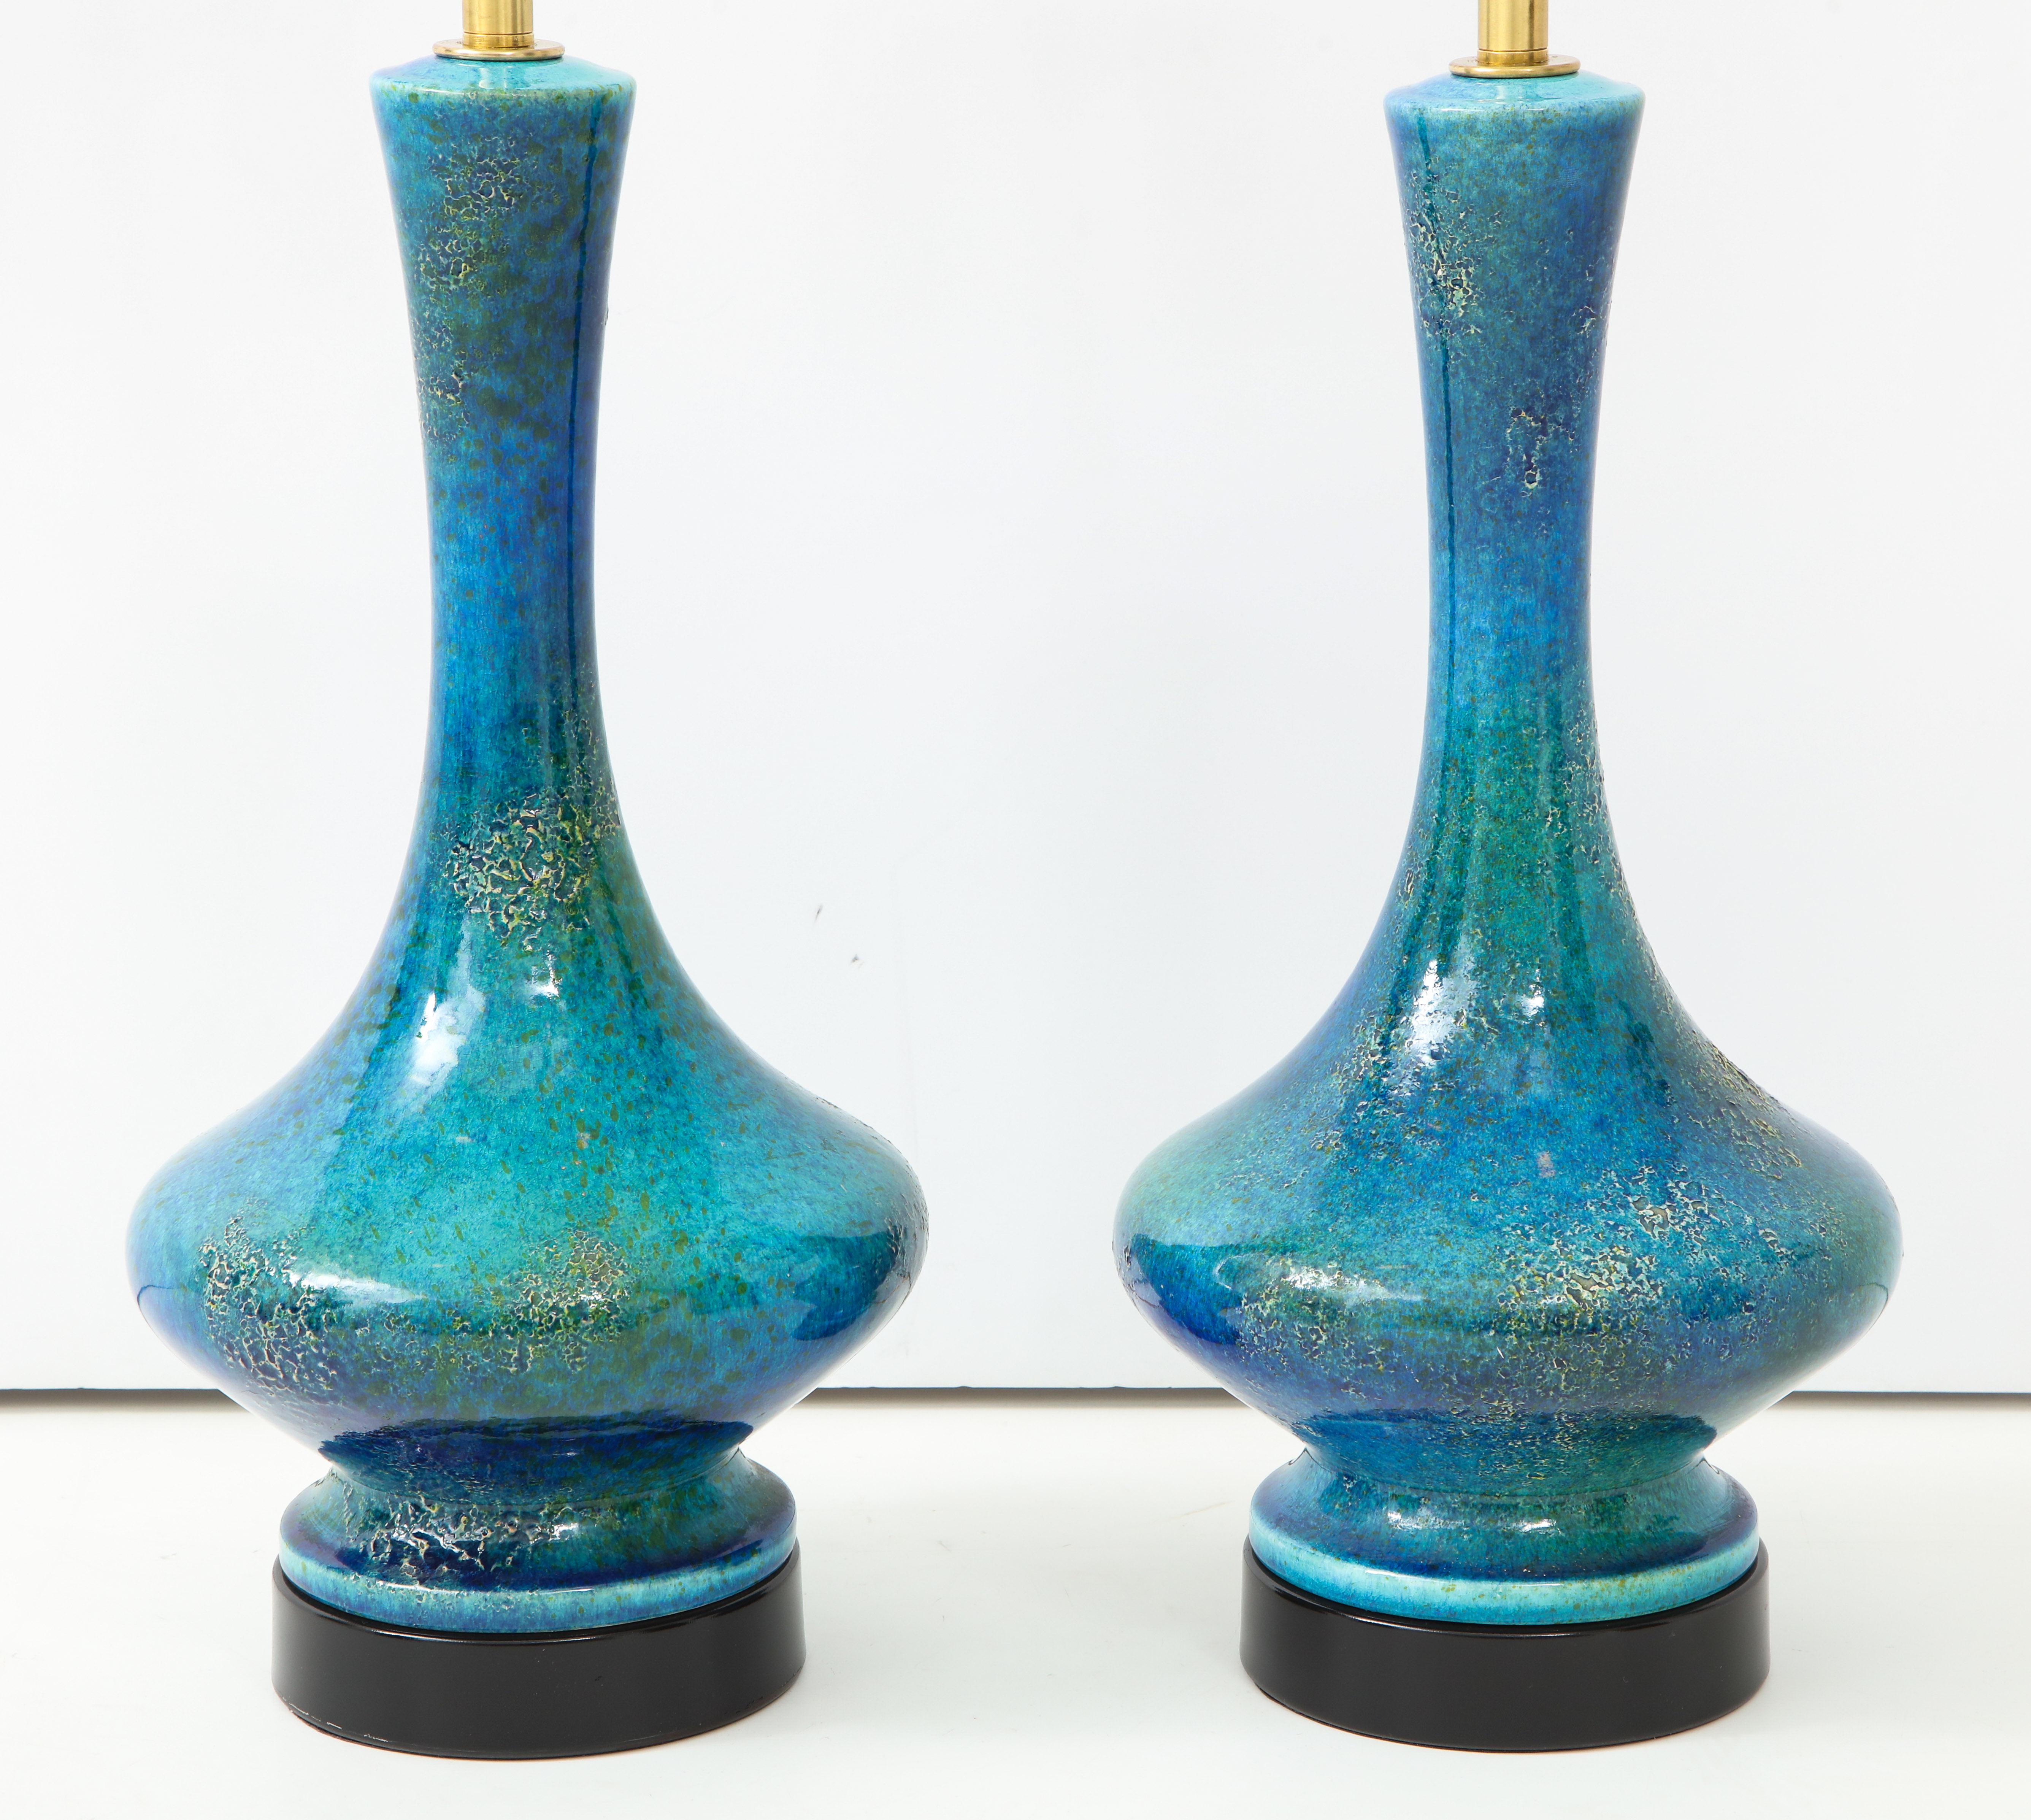 Pair of ceramic lamps with beautiful textured glazed finish.
The lamps have been newly rewired with polished brass double clusters.